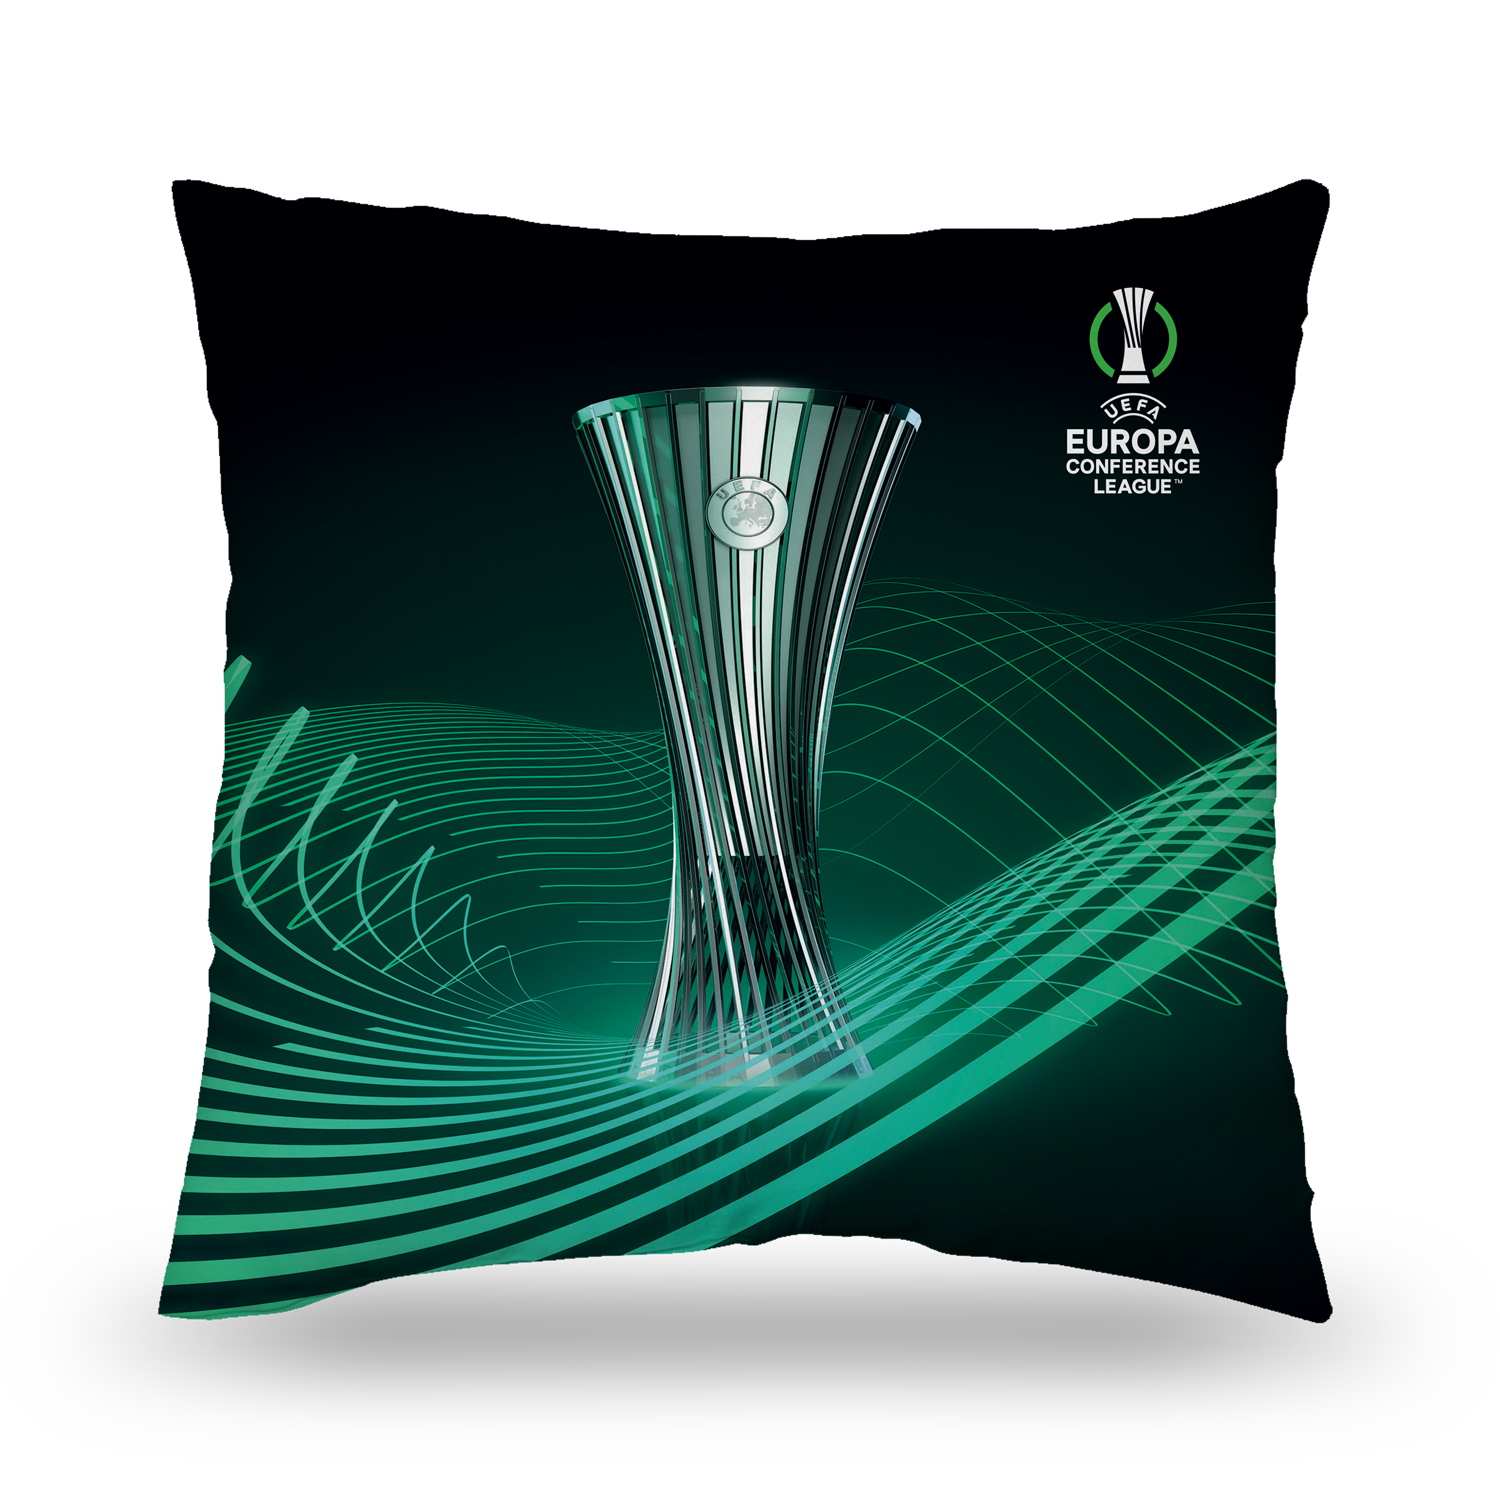 UEFA Europa Conference League Trophy Cushion UEFA Club Competitions Online Store